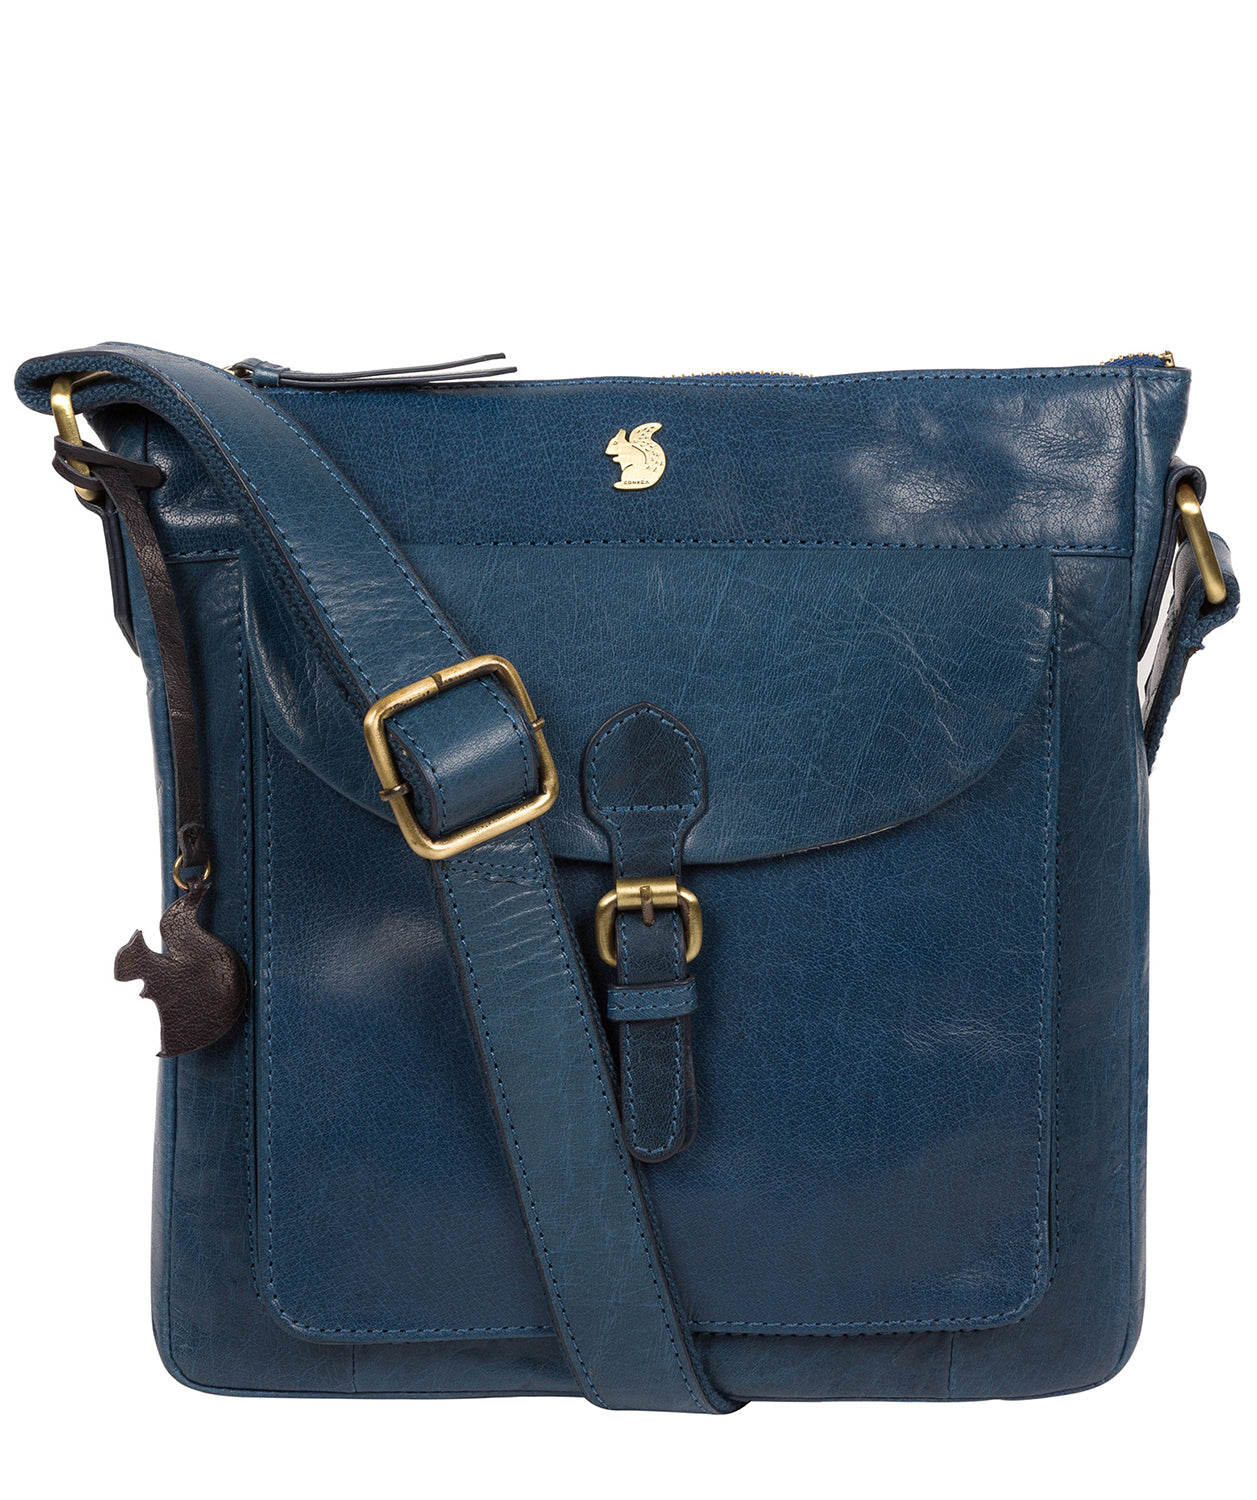 Blue Leather Shoulder Bag 'Josephine' by Conkca London – Pure Luxuries ...